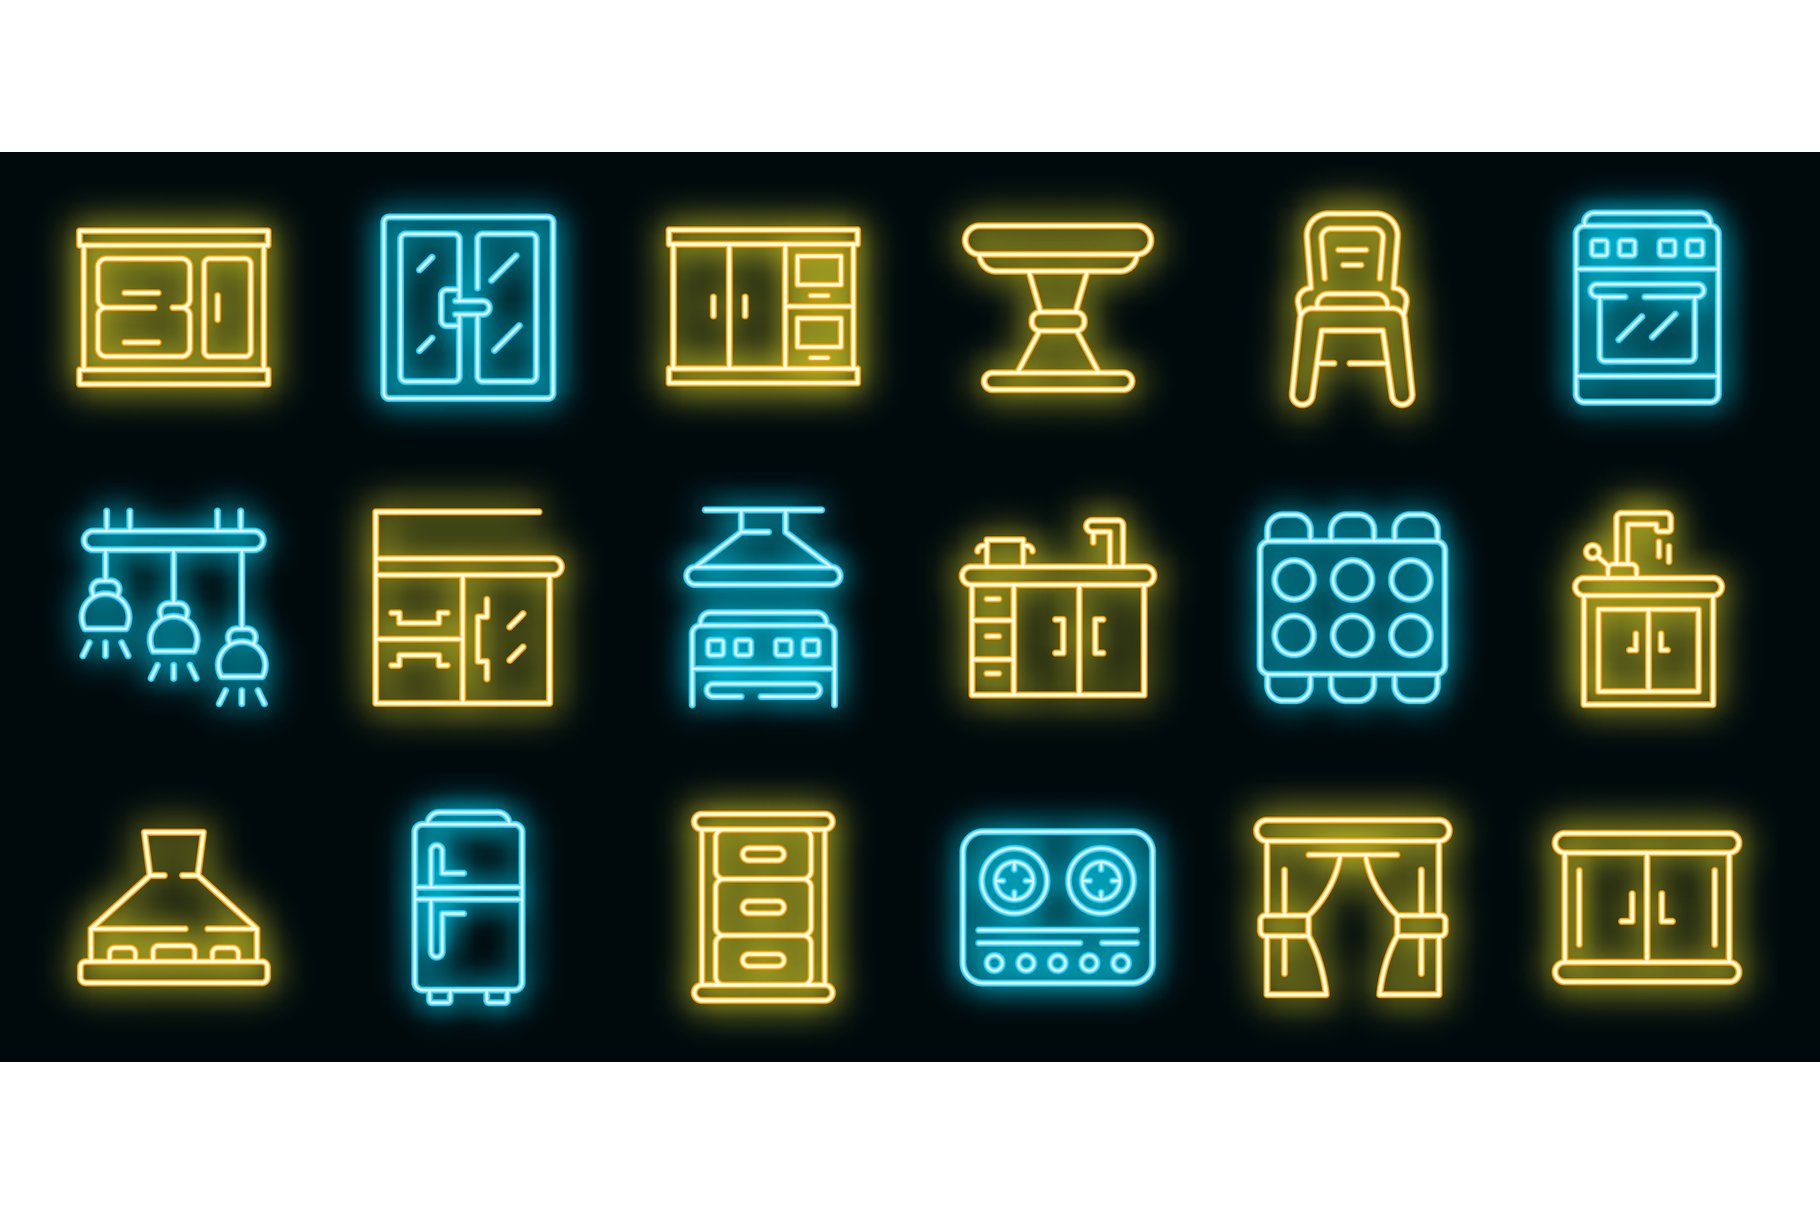 Kitchen furniture icons set vector cover image.